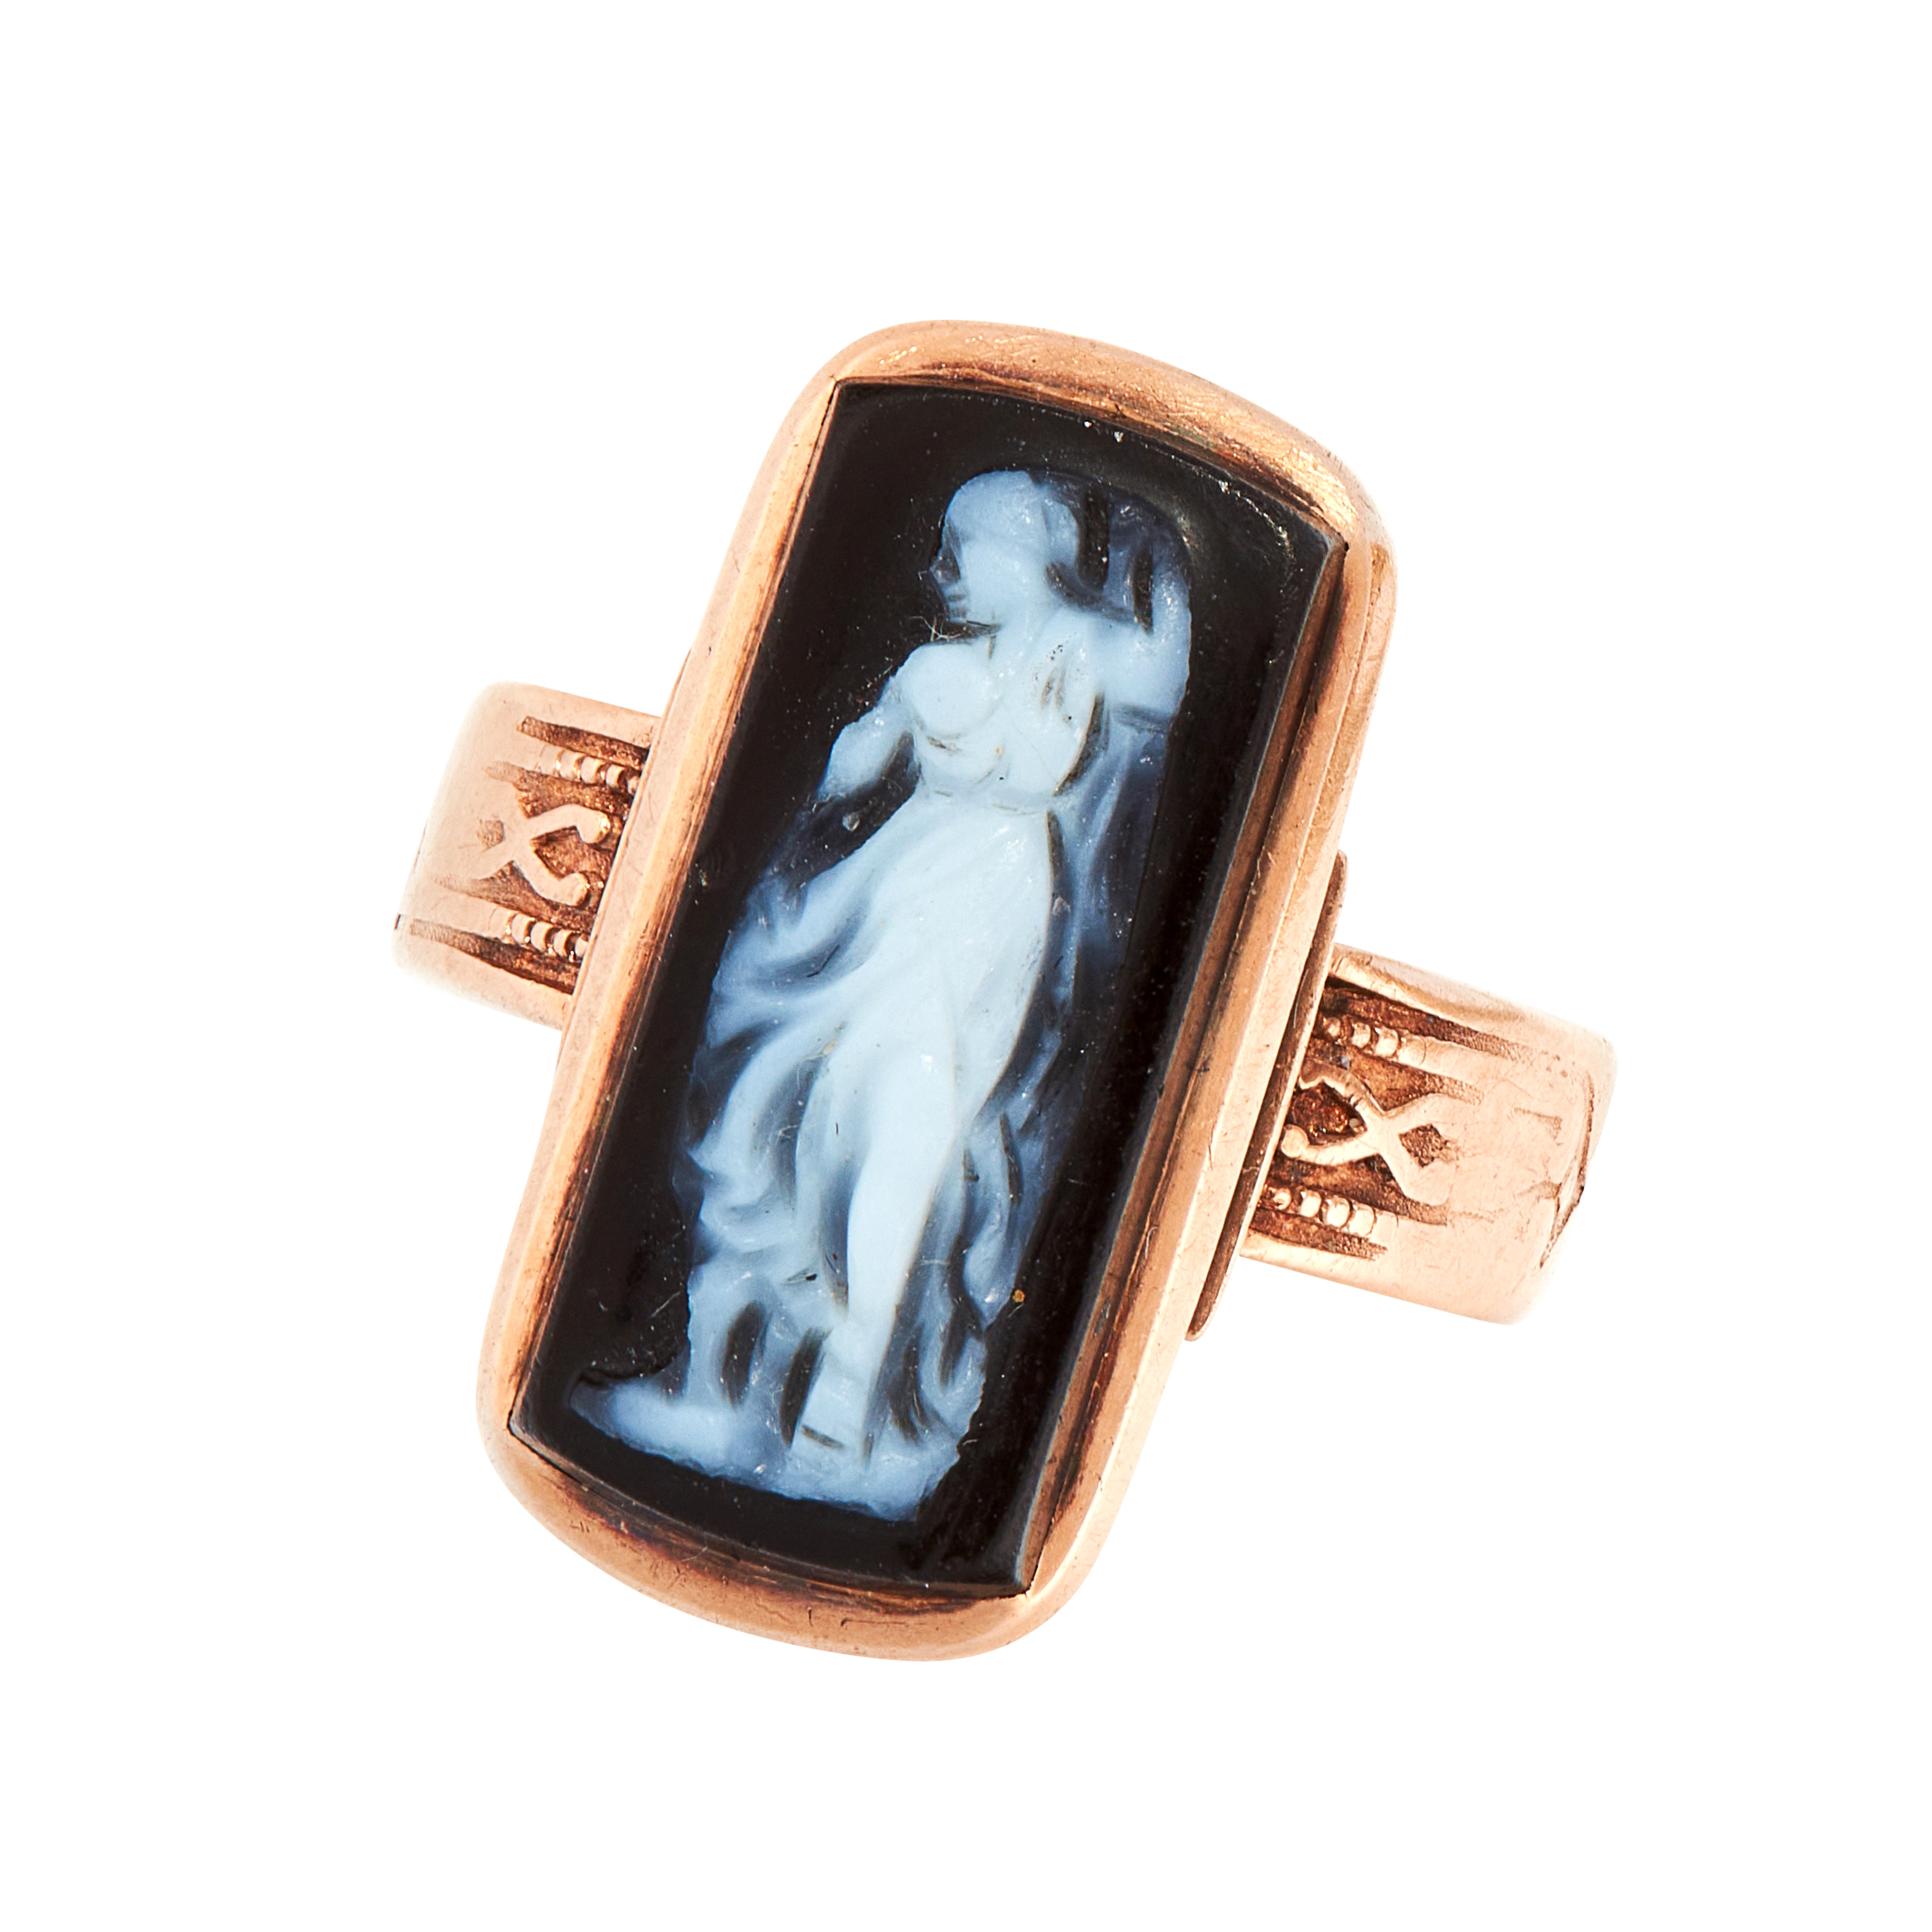 AN ANTIQUE CAMEO DRESS RING in yellow gold, set with a rectangular carved hard stone cameo depicting